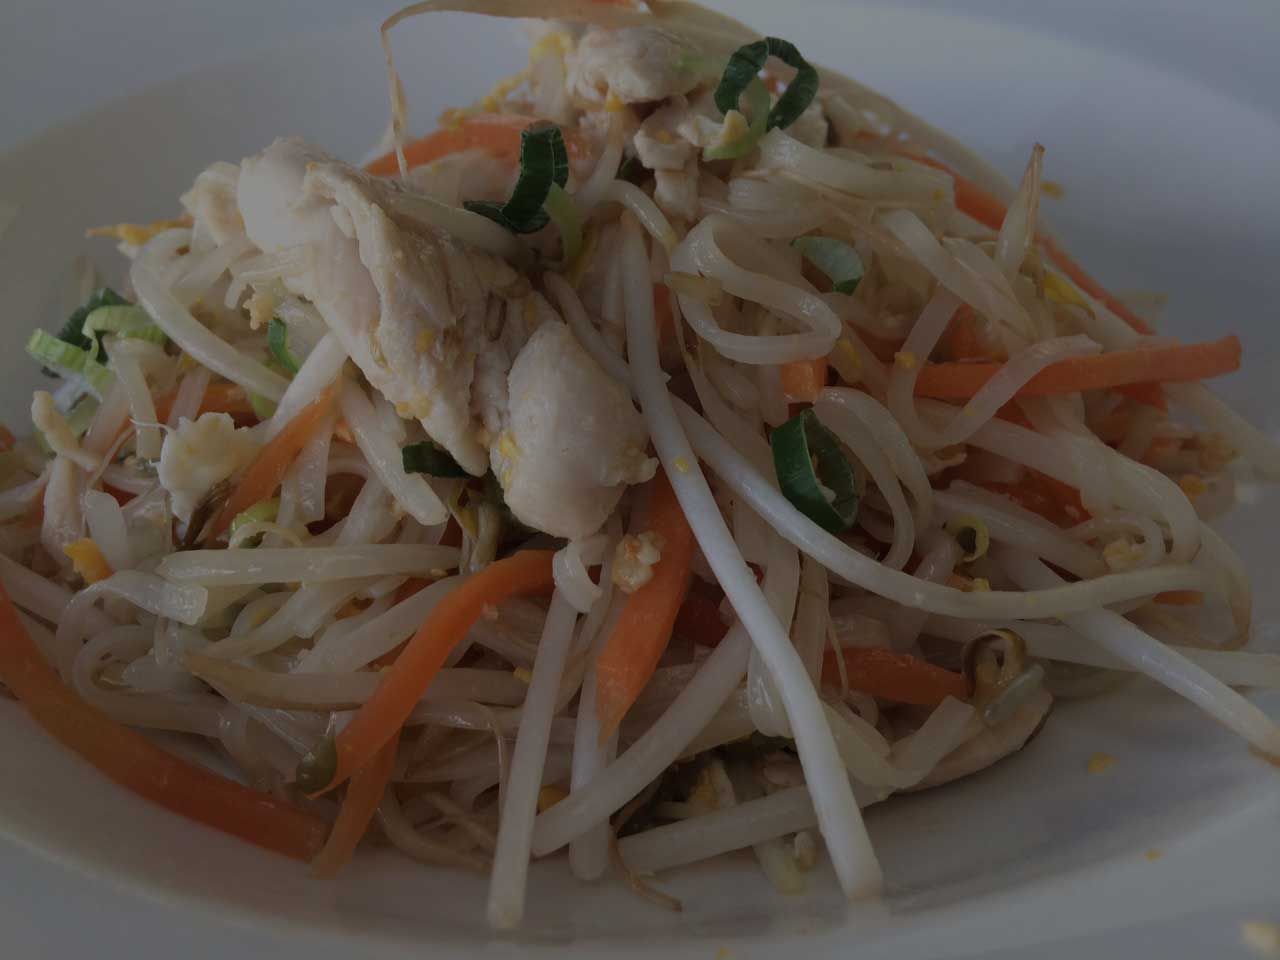 A close up of a plate of food with noodles and vegetables